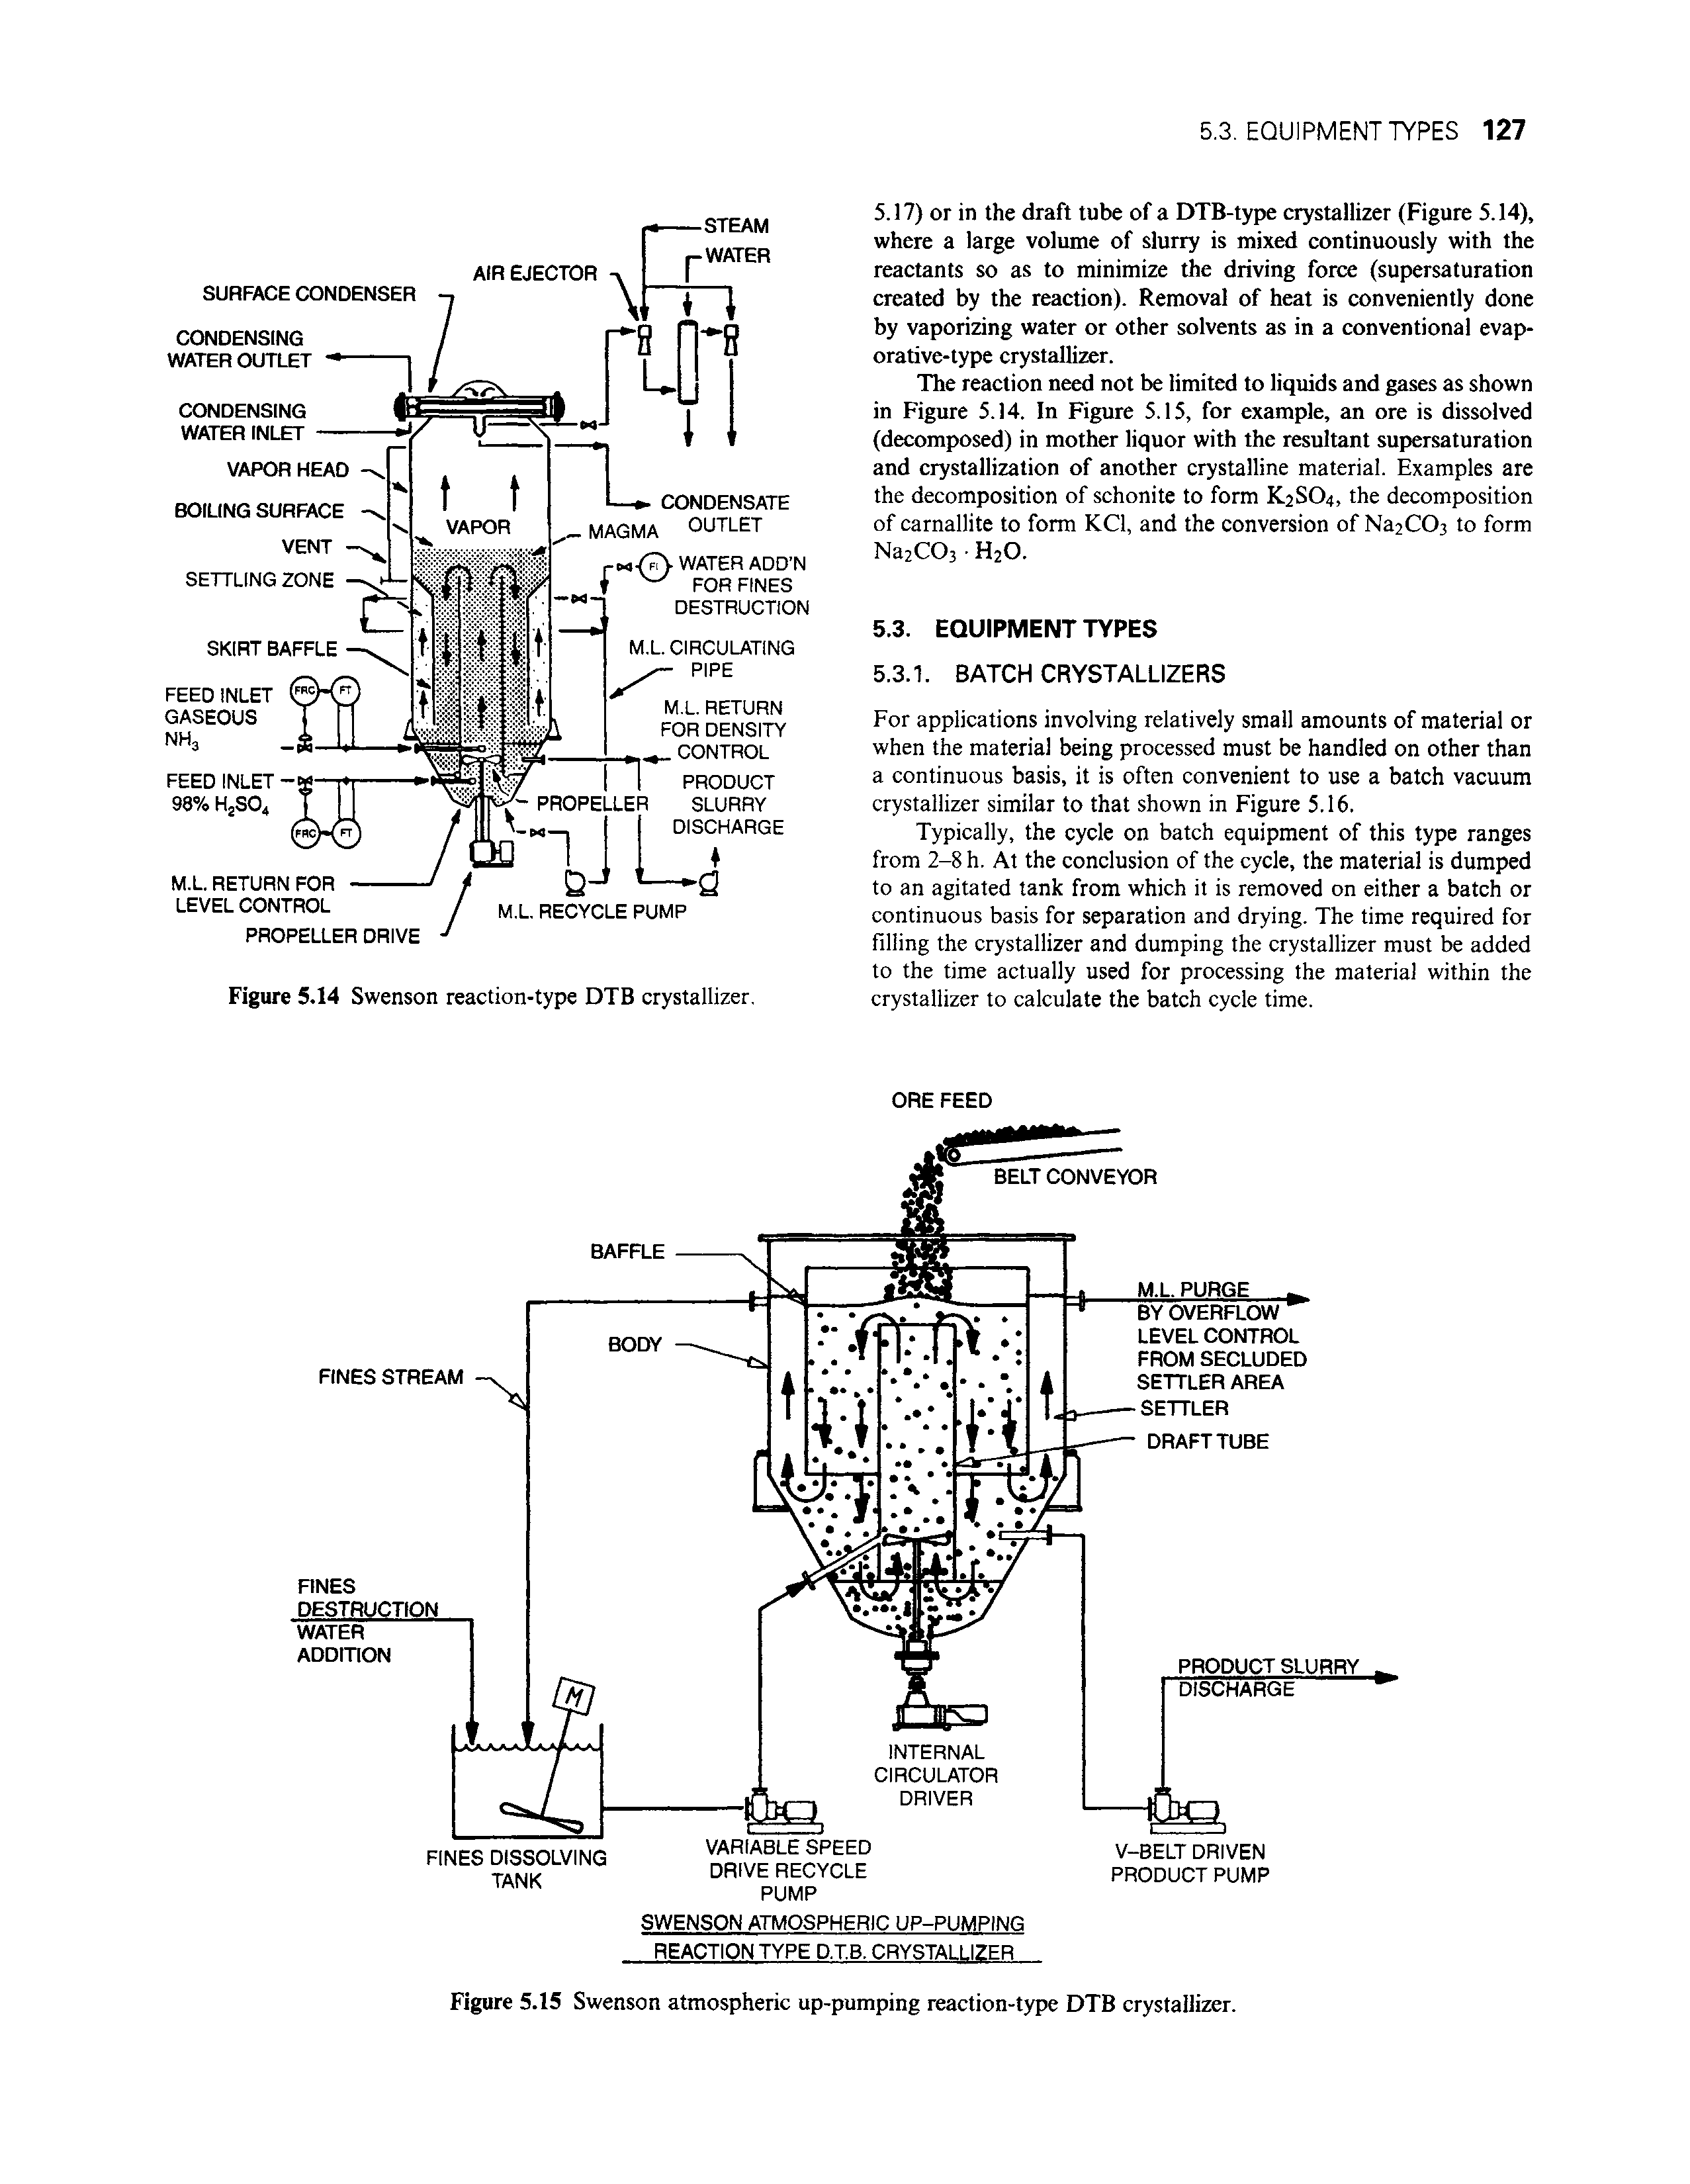 Figure 5.15 Swenson atmospheric up-pumping reaction-type DTB crystallizer.